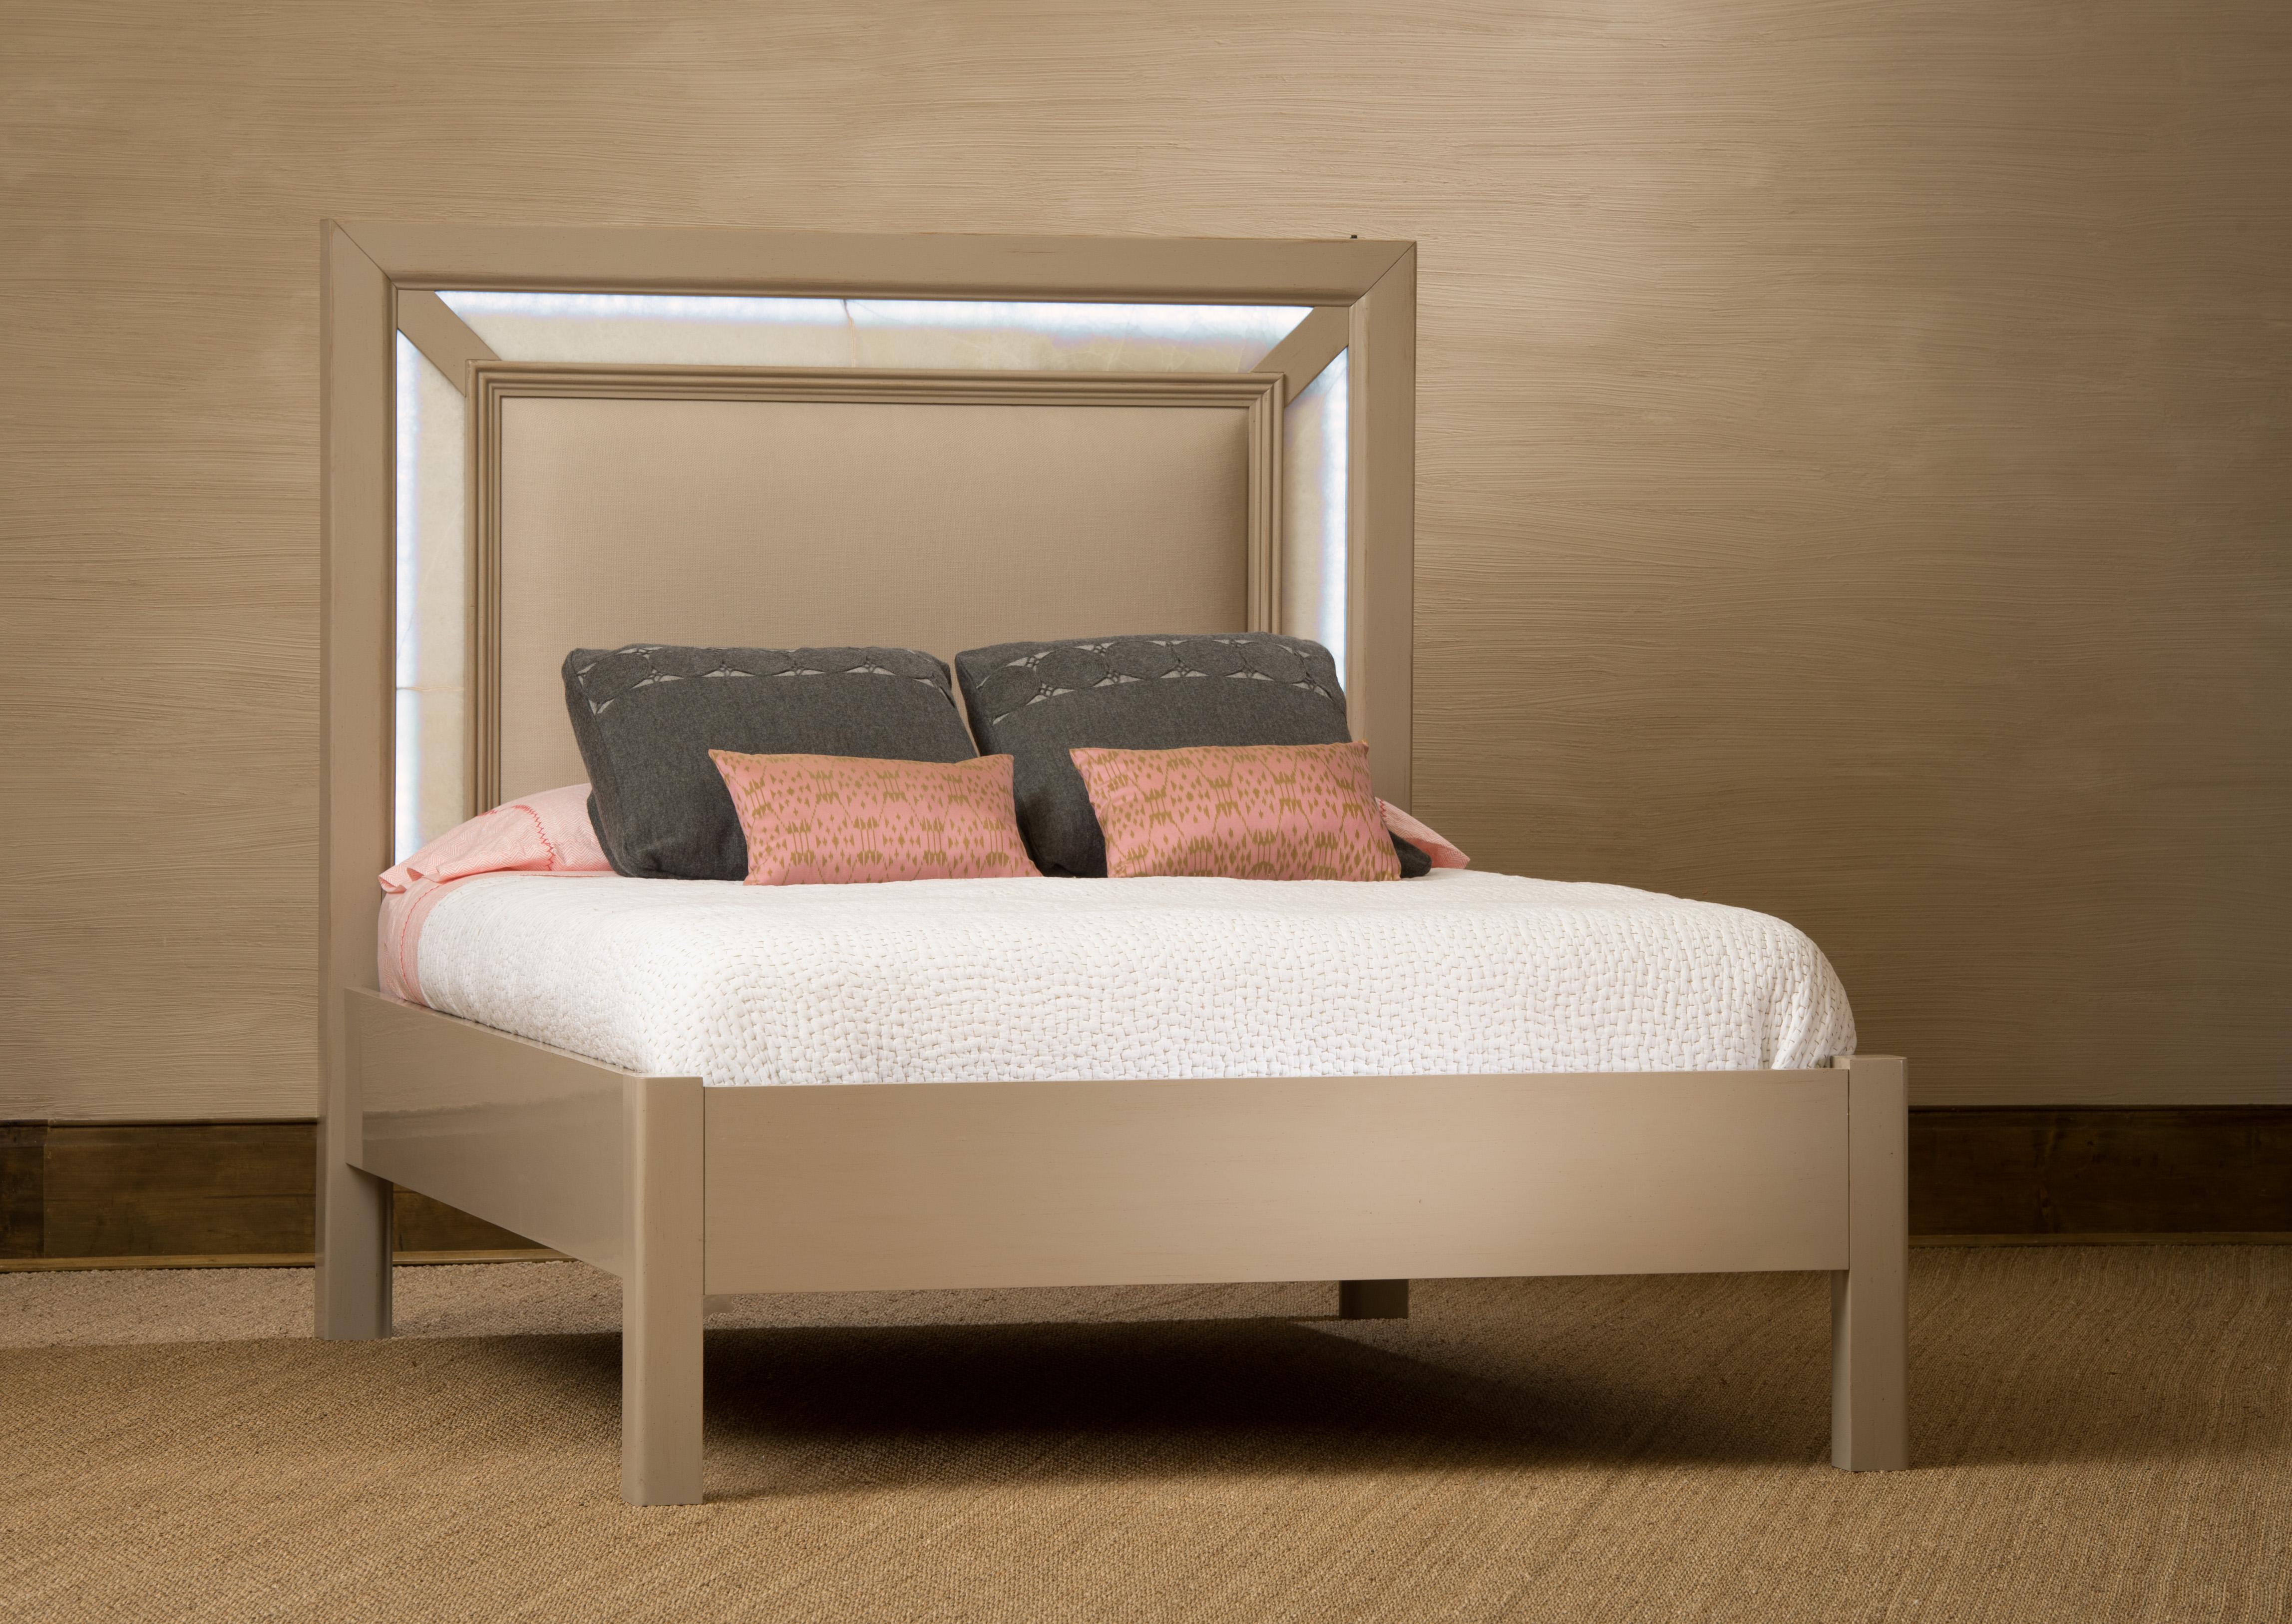 Give your bedroom more glow with our innovative LED-lit bed. The David bed has an interchangeable frame and headboard, and cleverly placed LED lights behind the onyx frame provide a subtle, ambient glow with one touch of a button. The lights can